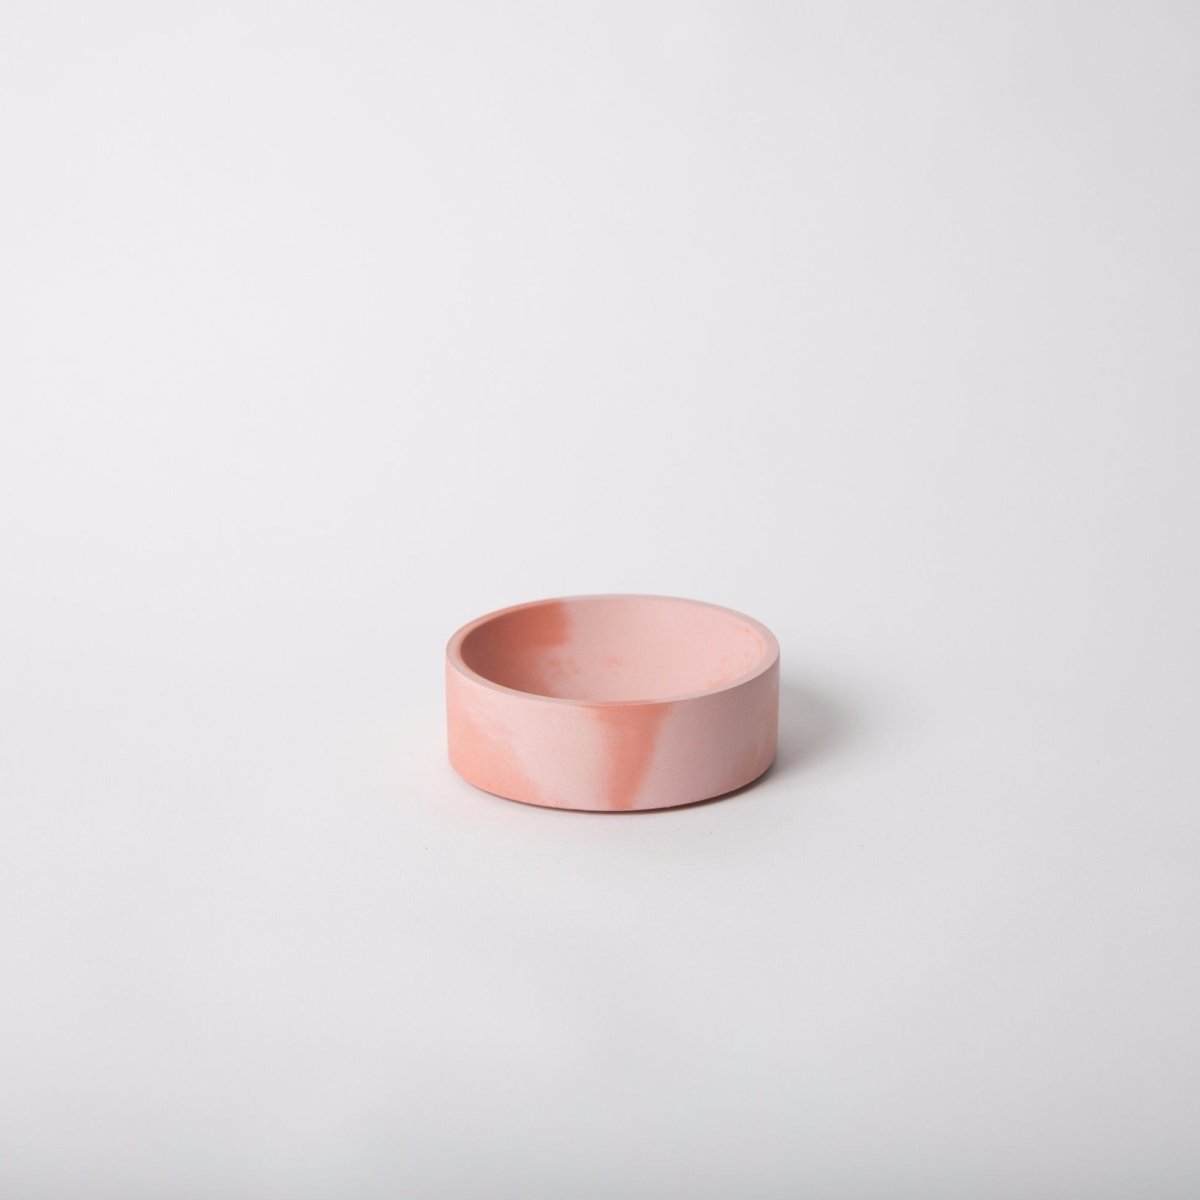 Four inch catch-all vessel in the shade pink + coral. Made by Pretti.Cool in Houston, Texas.